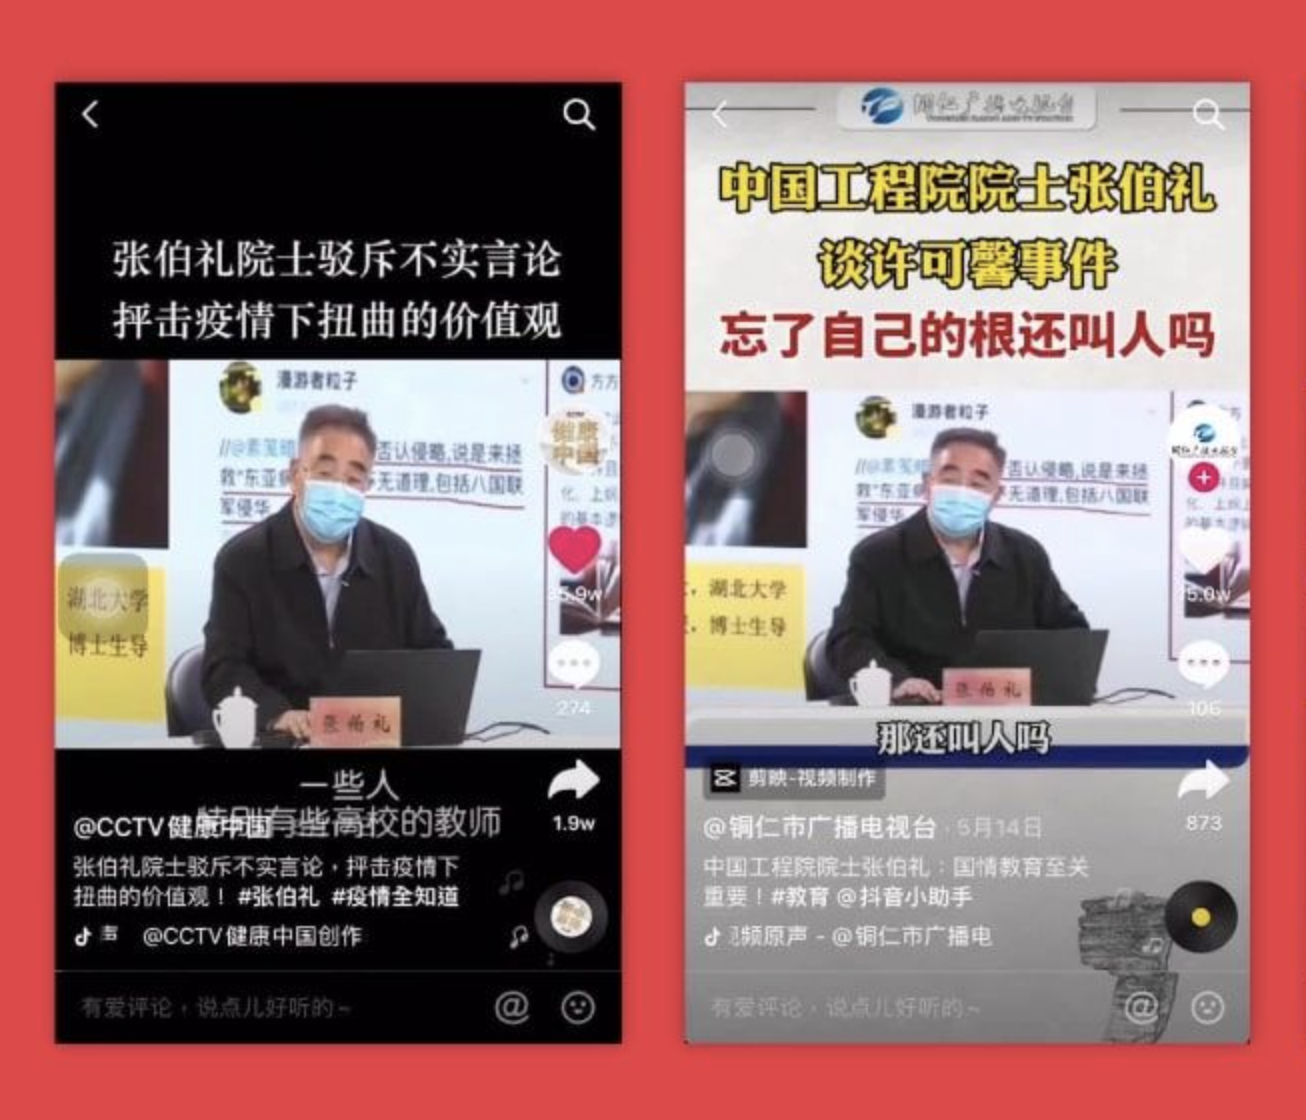 Screenshots of a video featuring Zhang Boli reposted on Douyin